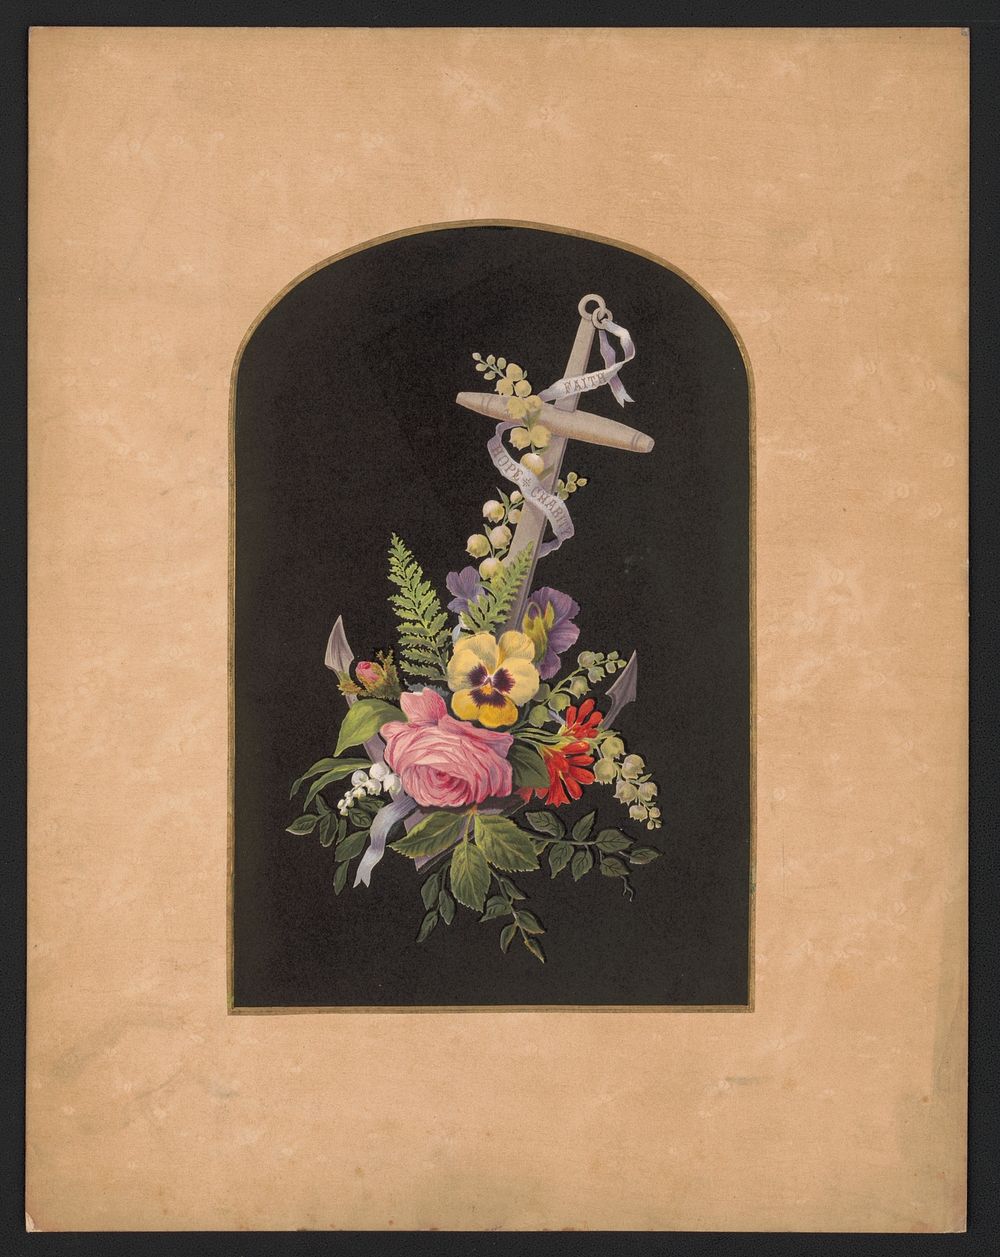 Anchor and flowers, no. 2 / after Mrs. O.E. Whitney., L. Prang & Co., publisher